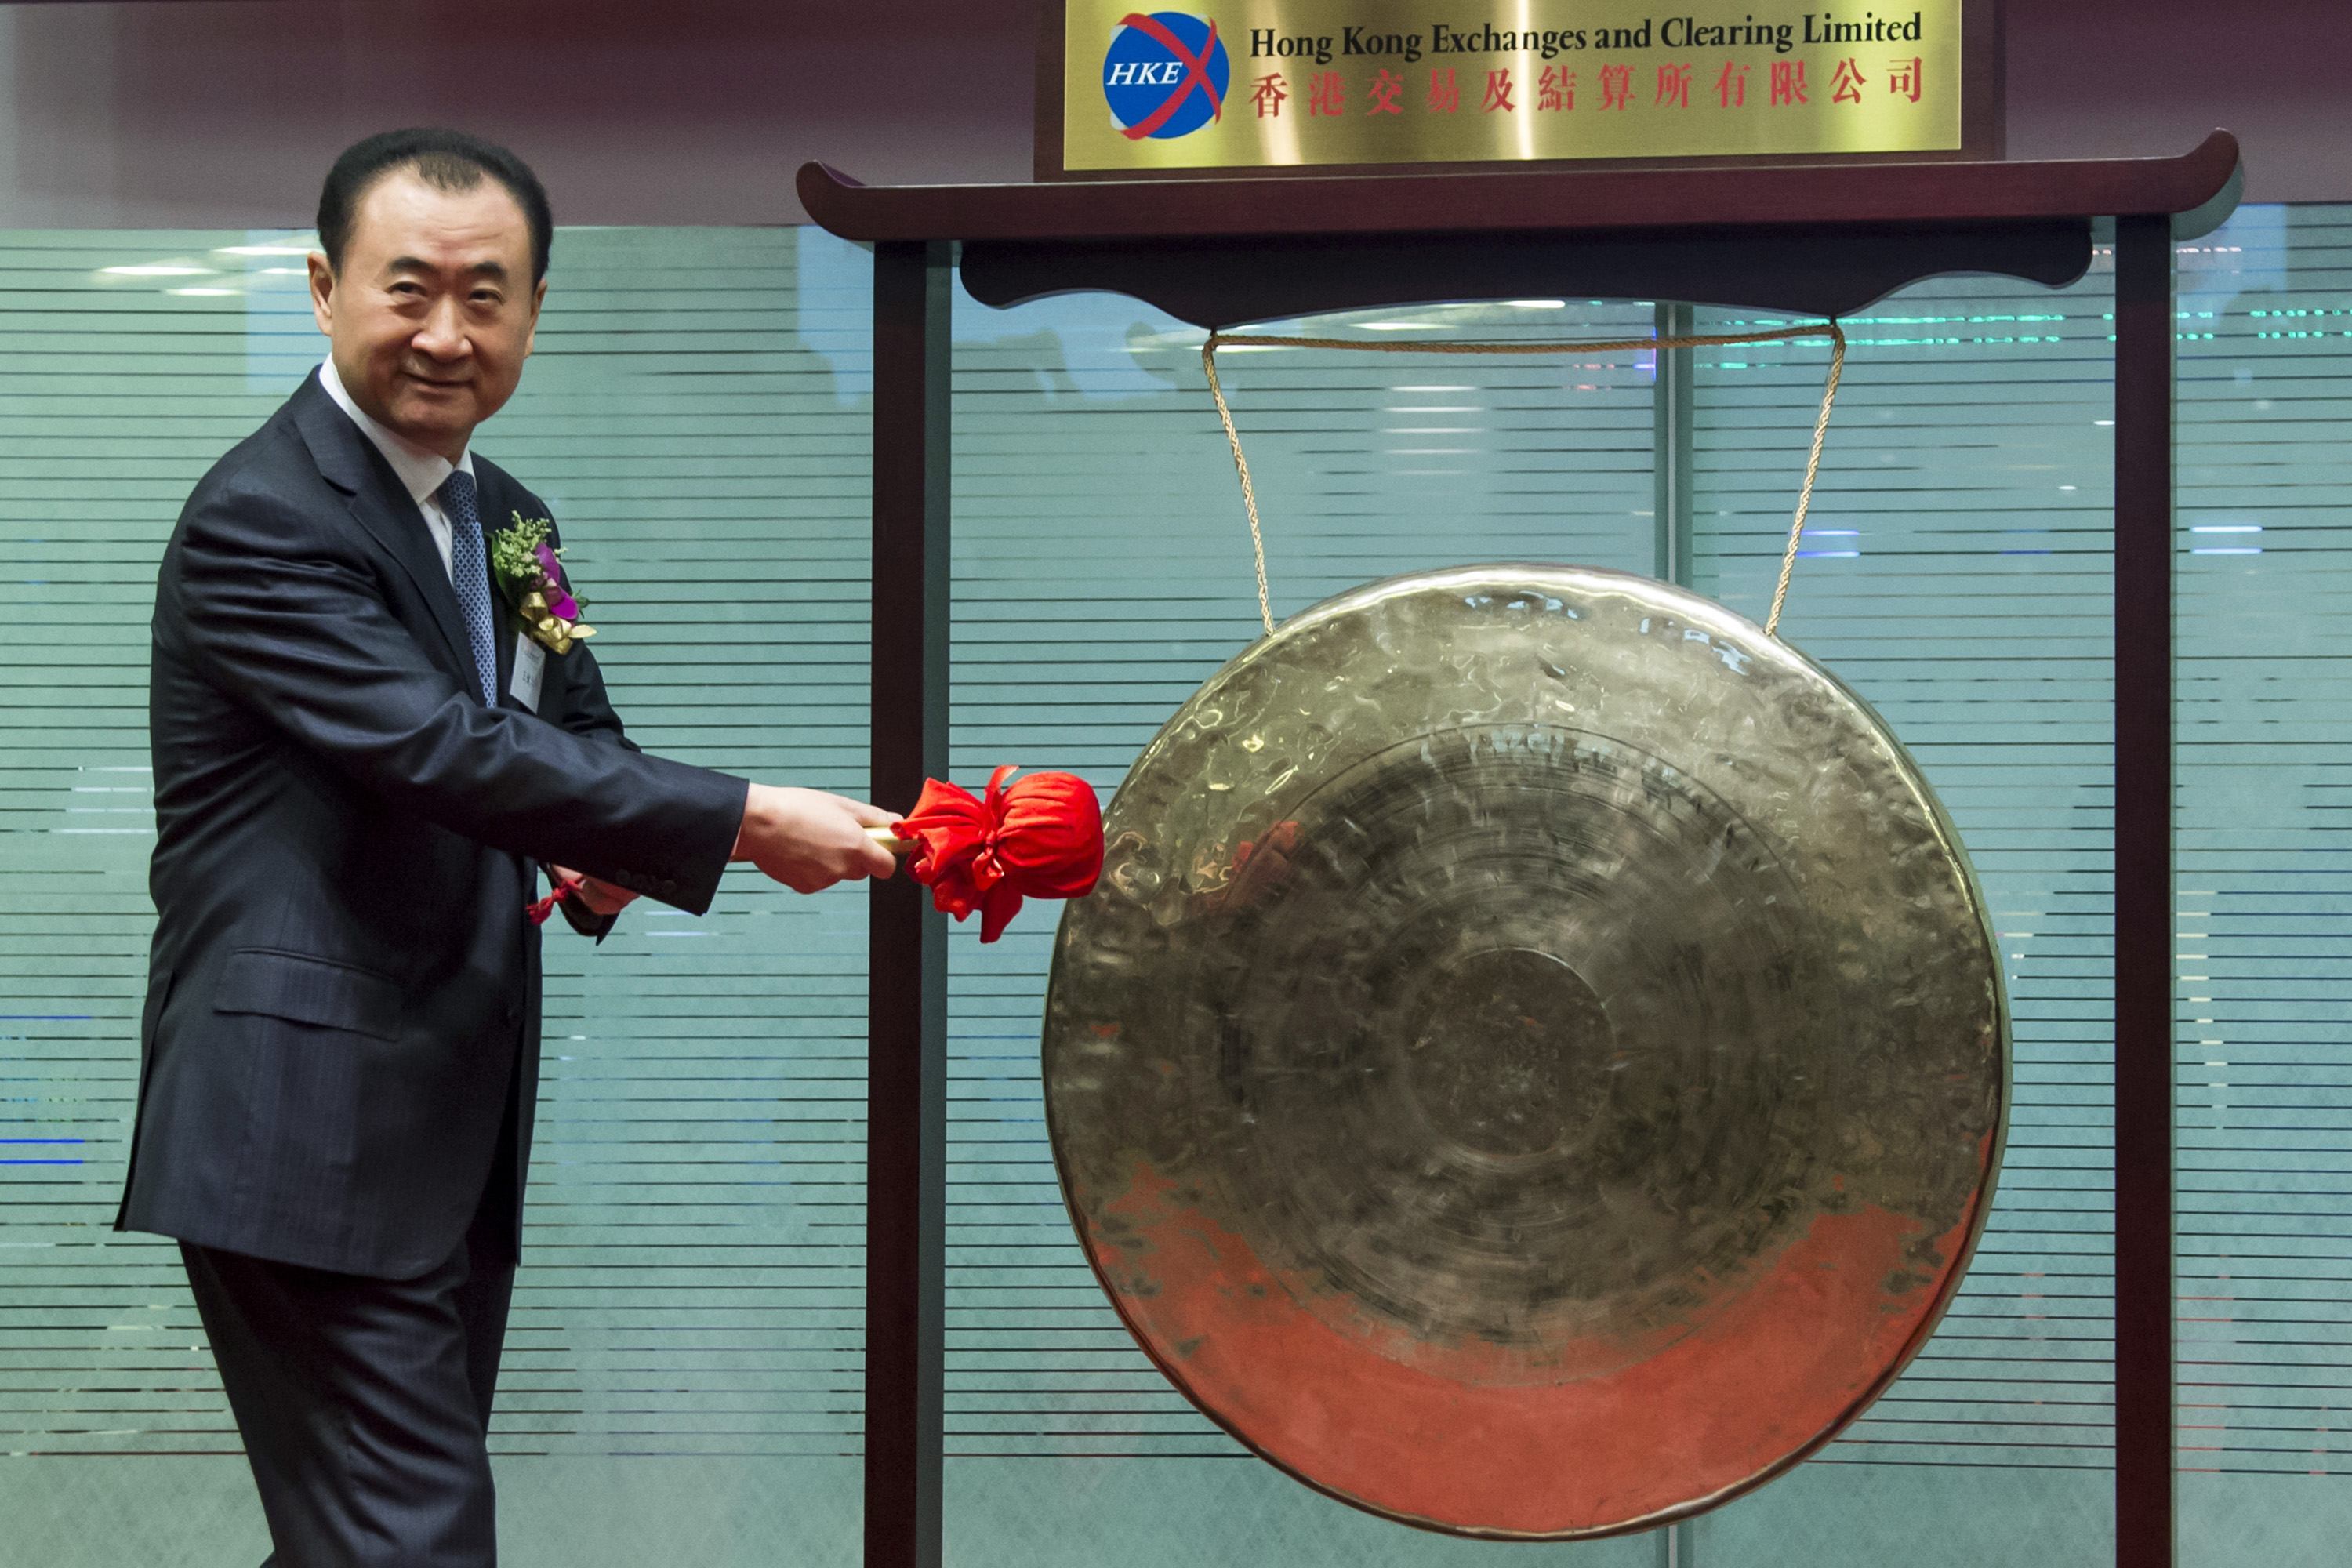 Wang Jianlin, chairman of Wanda commercial properties, hits a gong during the debut of the company in Hong Kong's stock exchange. Wanda E-commerce, its joint venture with Tencent and Baidu, saw its valuation soar to 20 billion yuan (HK$25.4 billion) Photo: Reuters